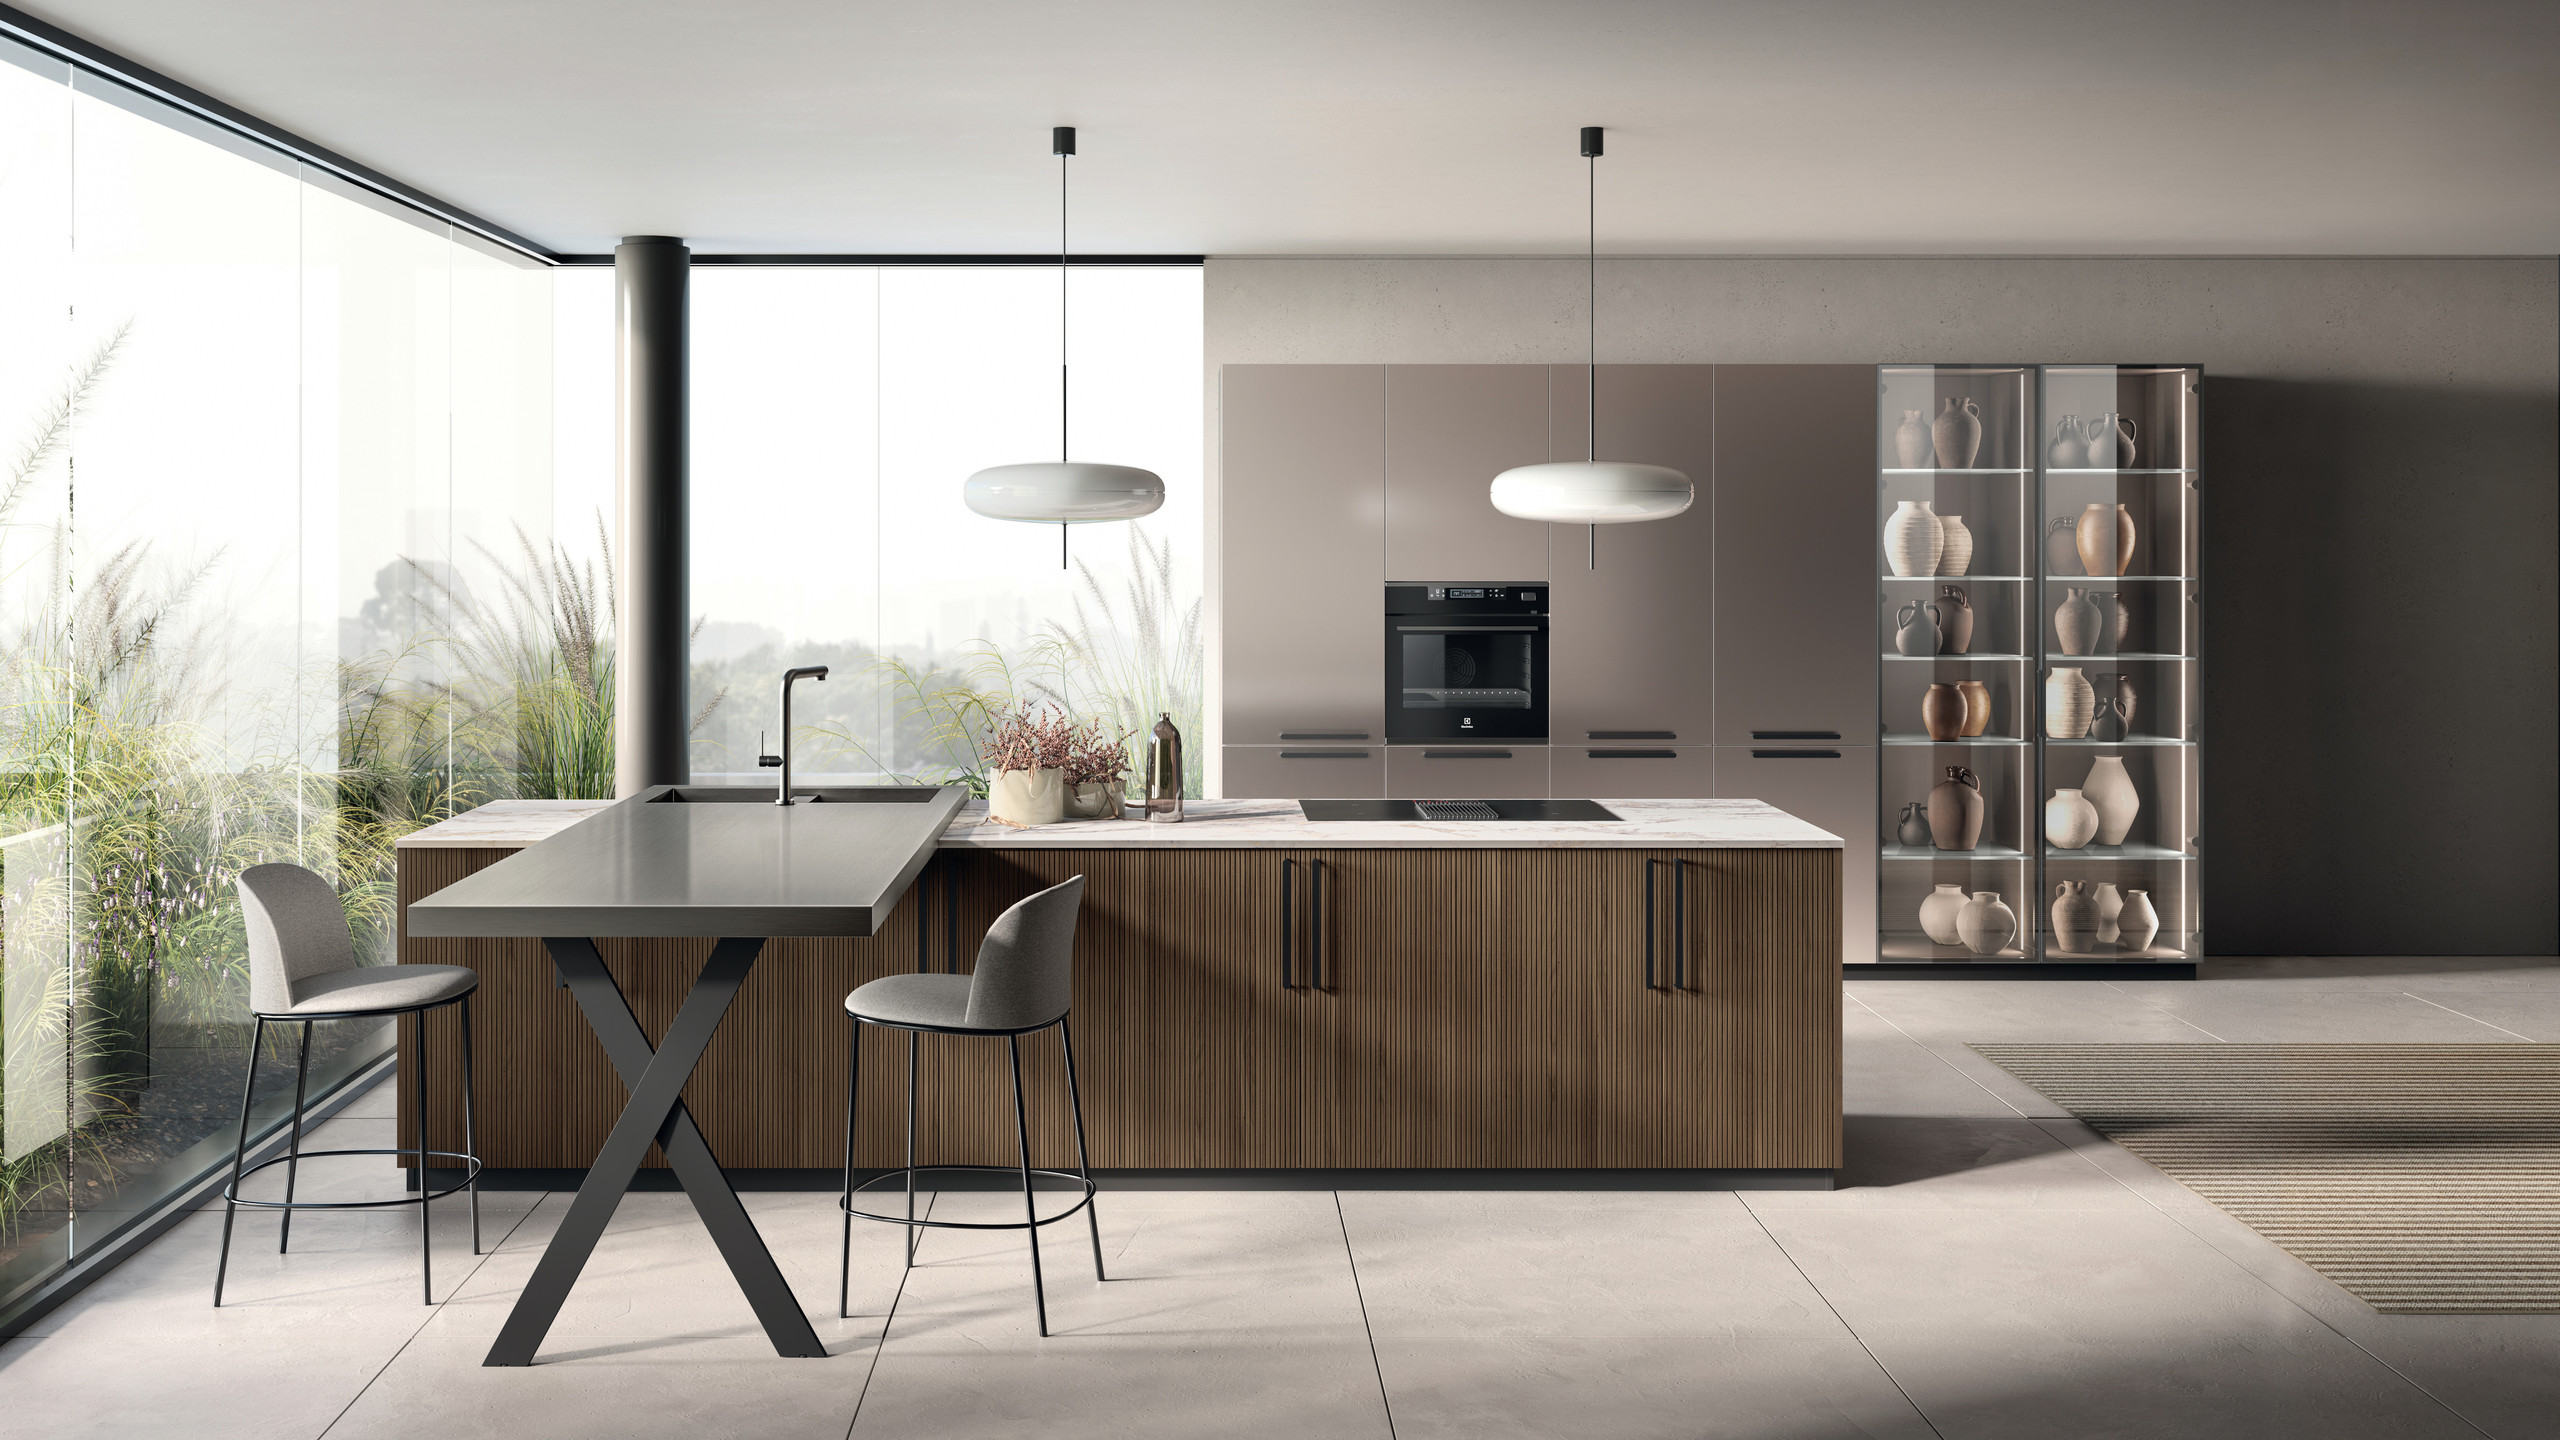 Kitchens, Bathrooms, Living Rooms and Walk-in Wardrobes | Scavolini